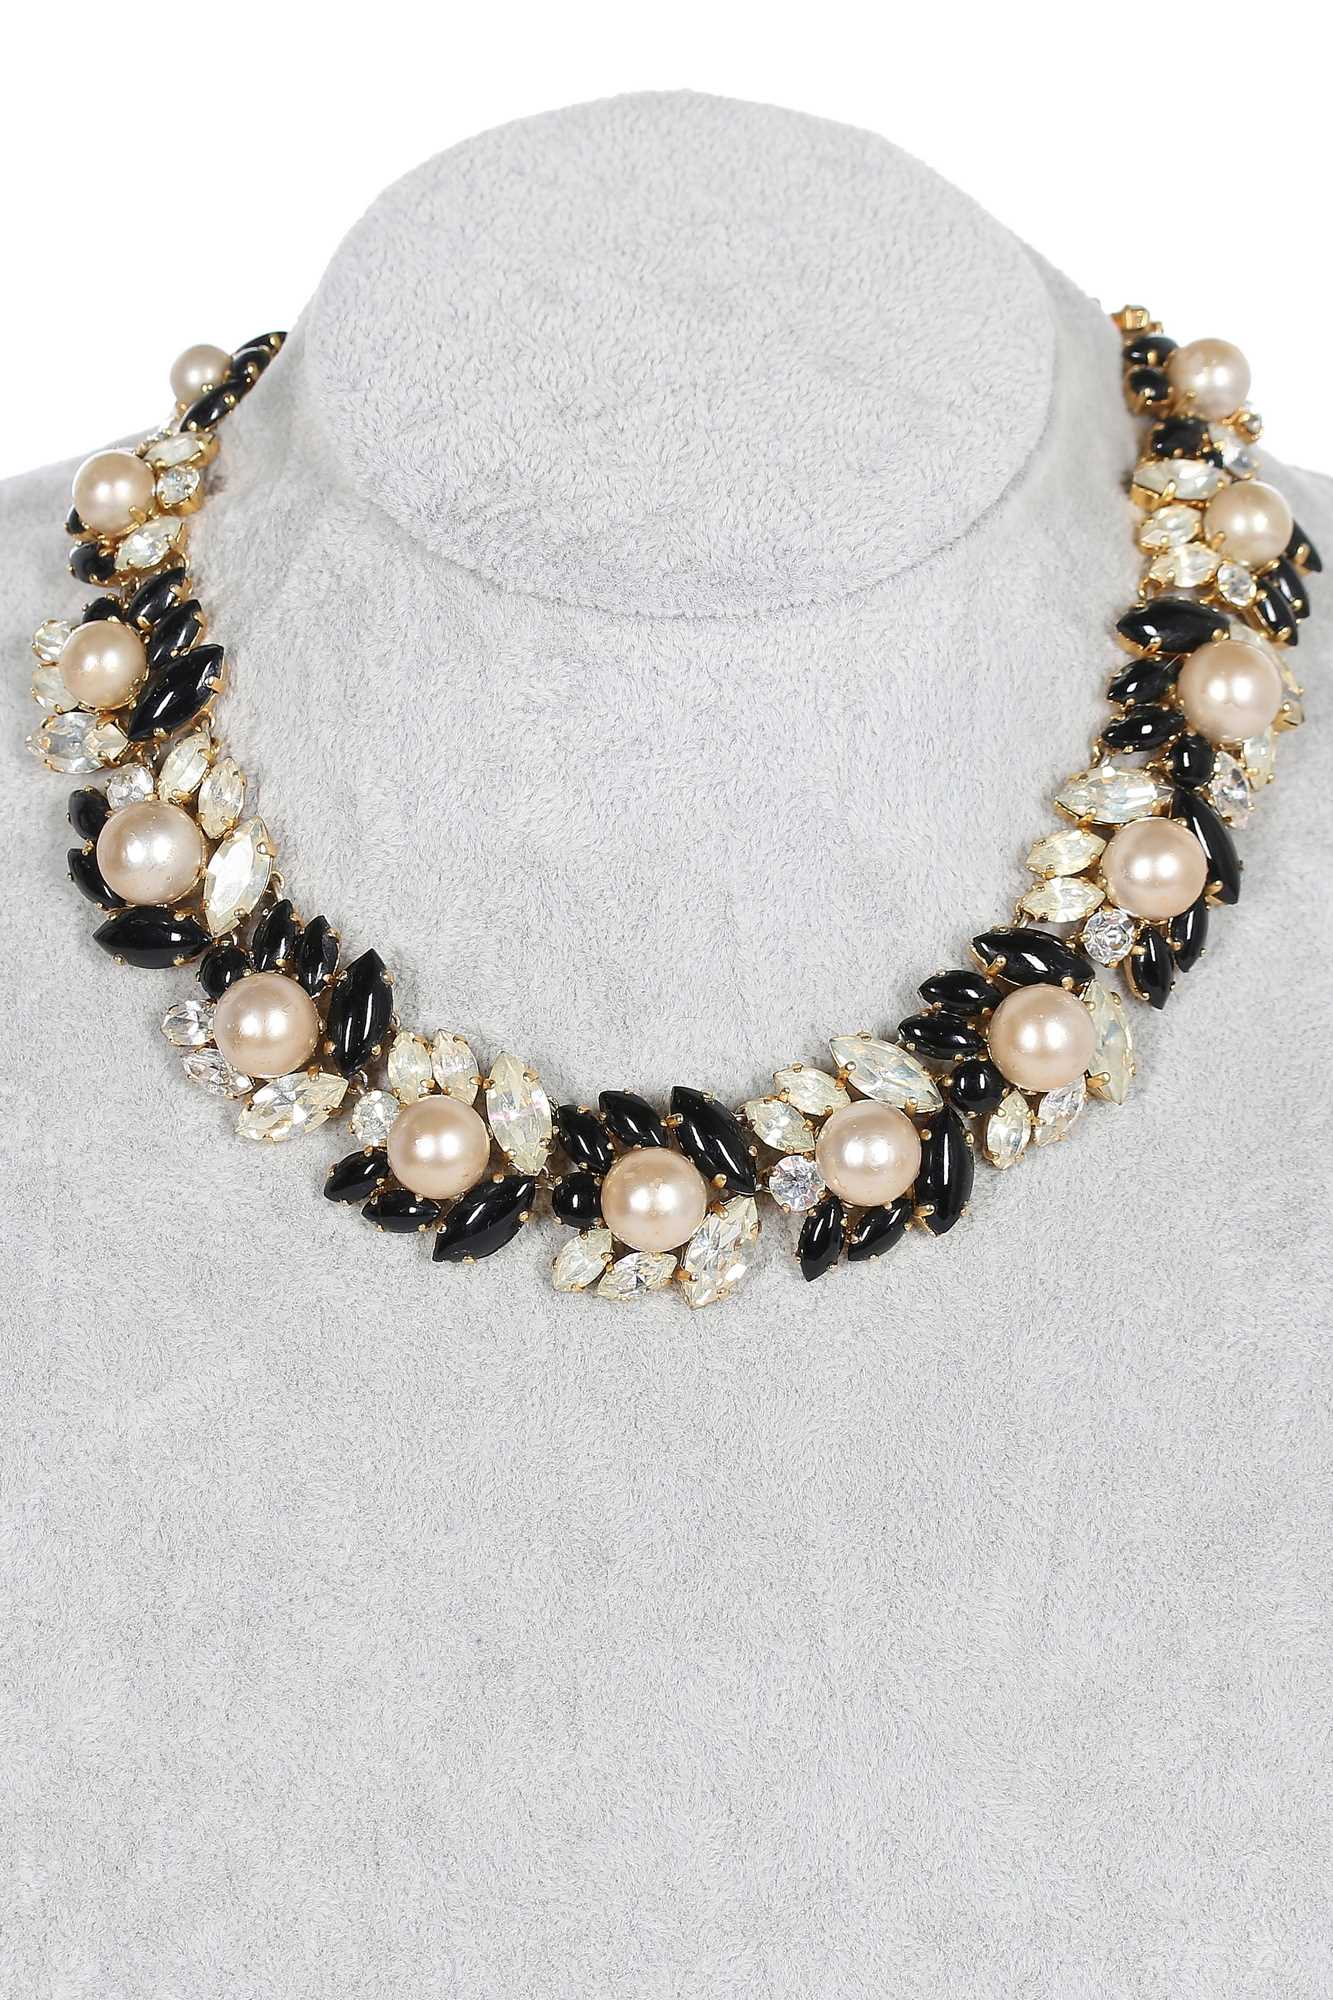 Lot 27 - A Dior necklace of faceted clear and polished black 'stones', 1964